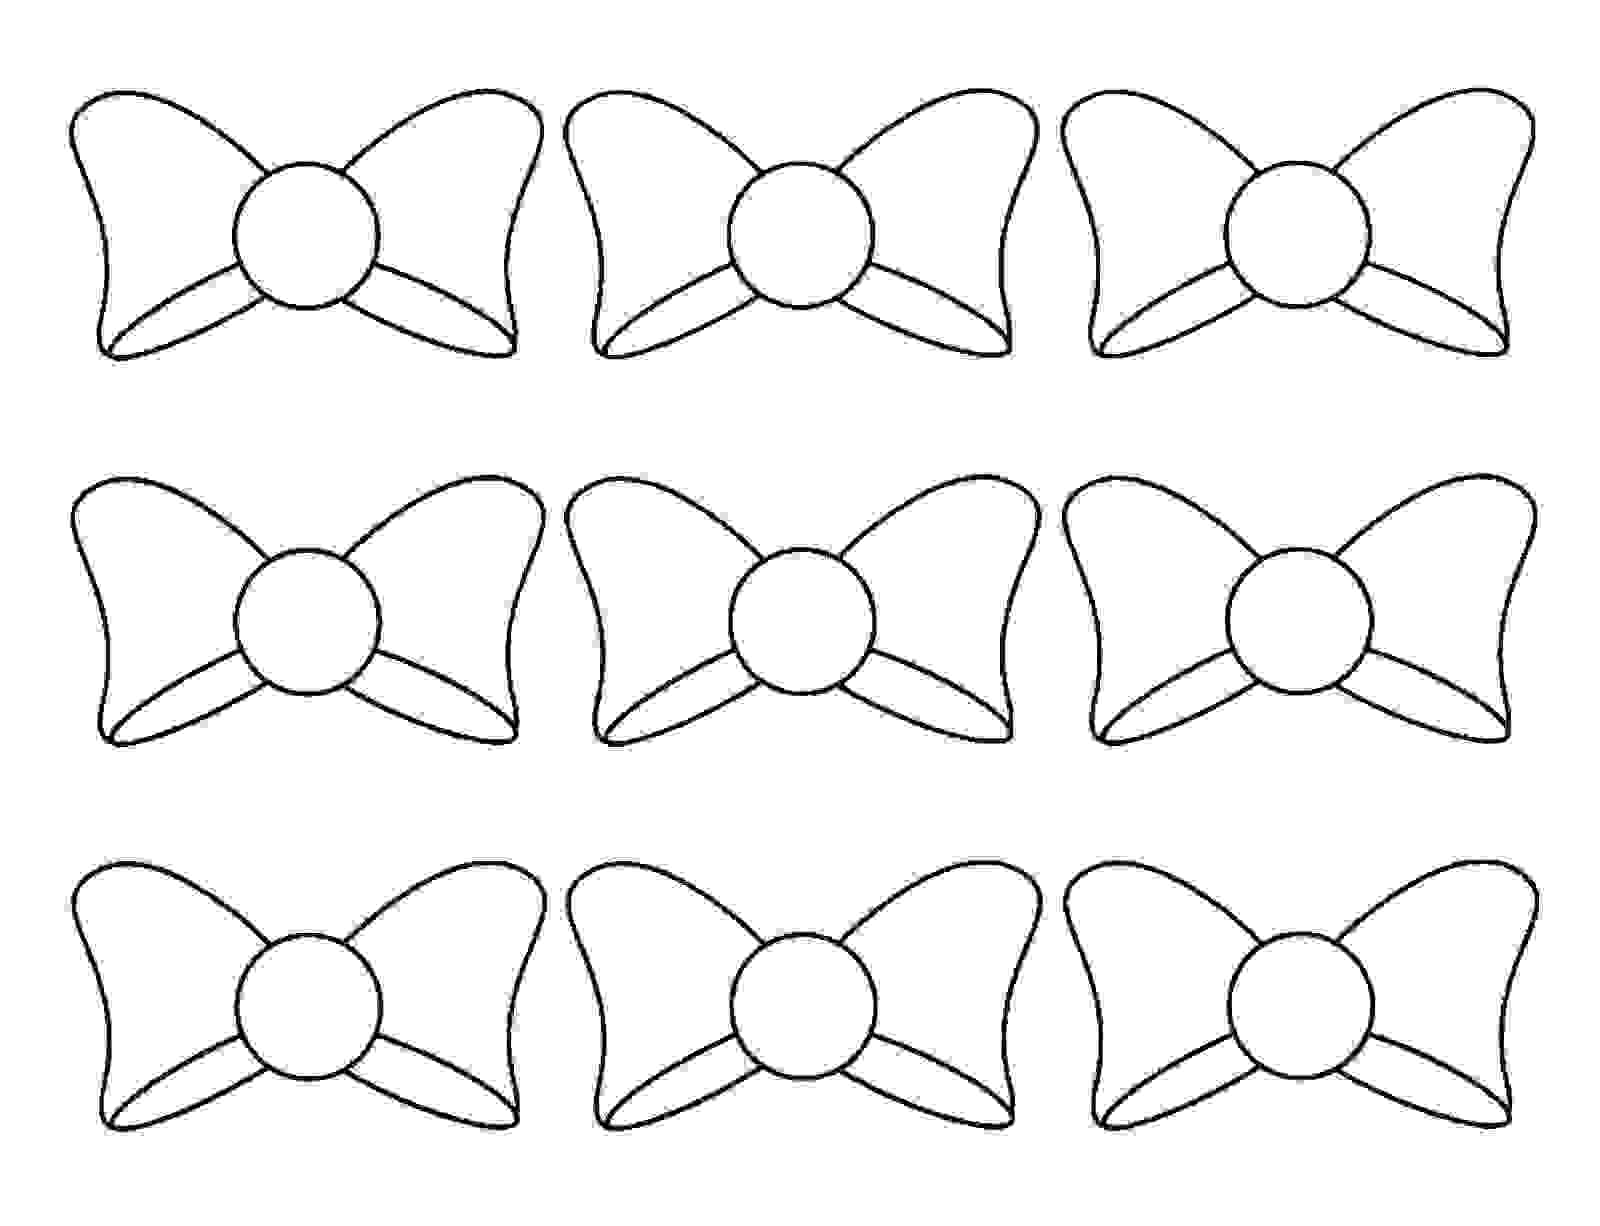 A lot of hair bow of Joelle Joanie Coloring Pages